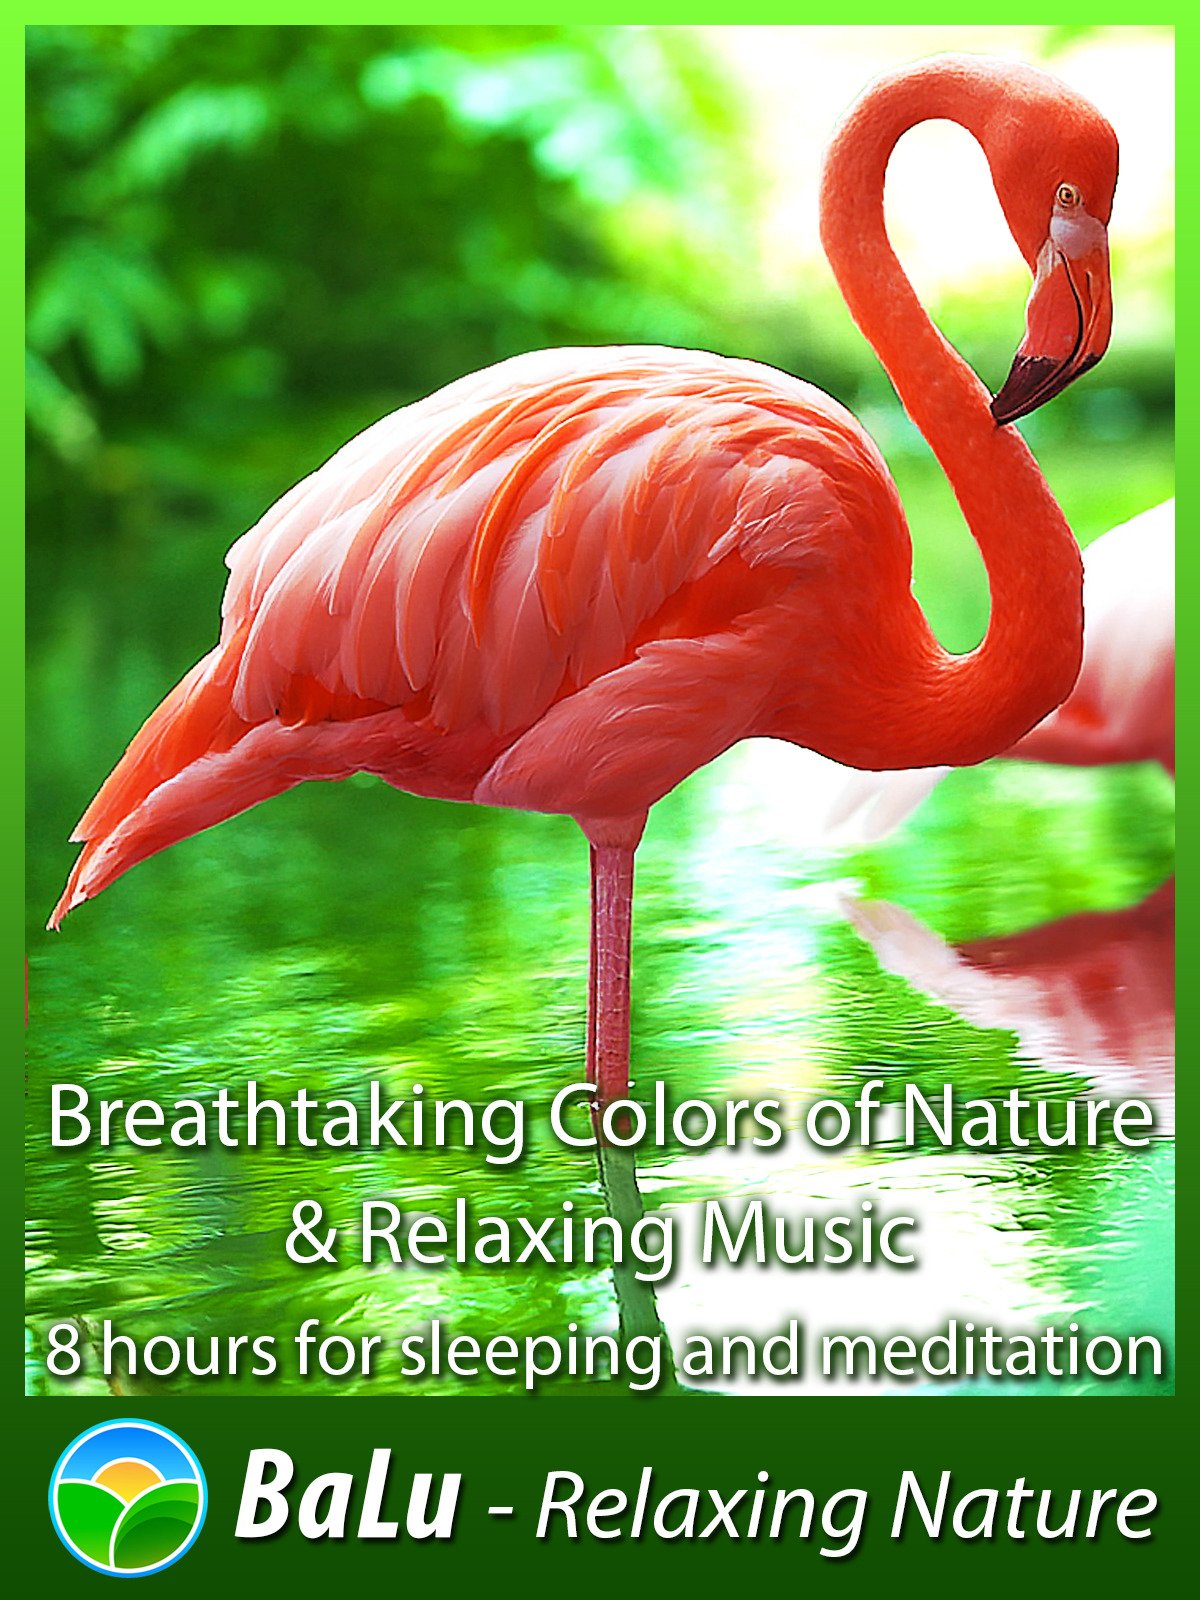 Amazon.com: Breathtaking Colors of Nature & Relaxing Music - 8 hours ...